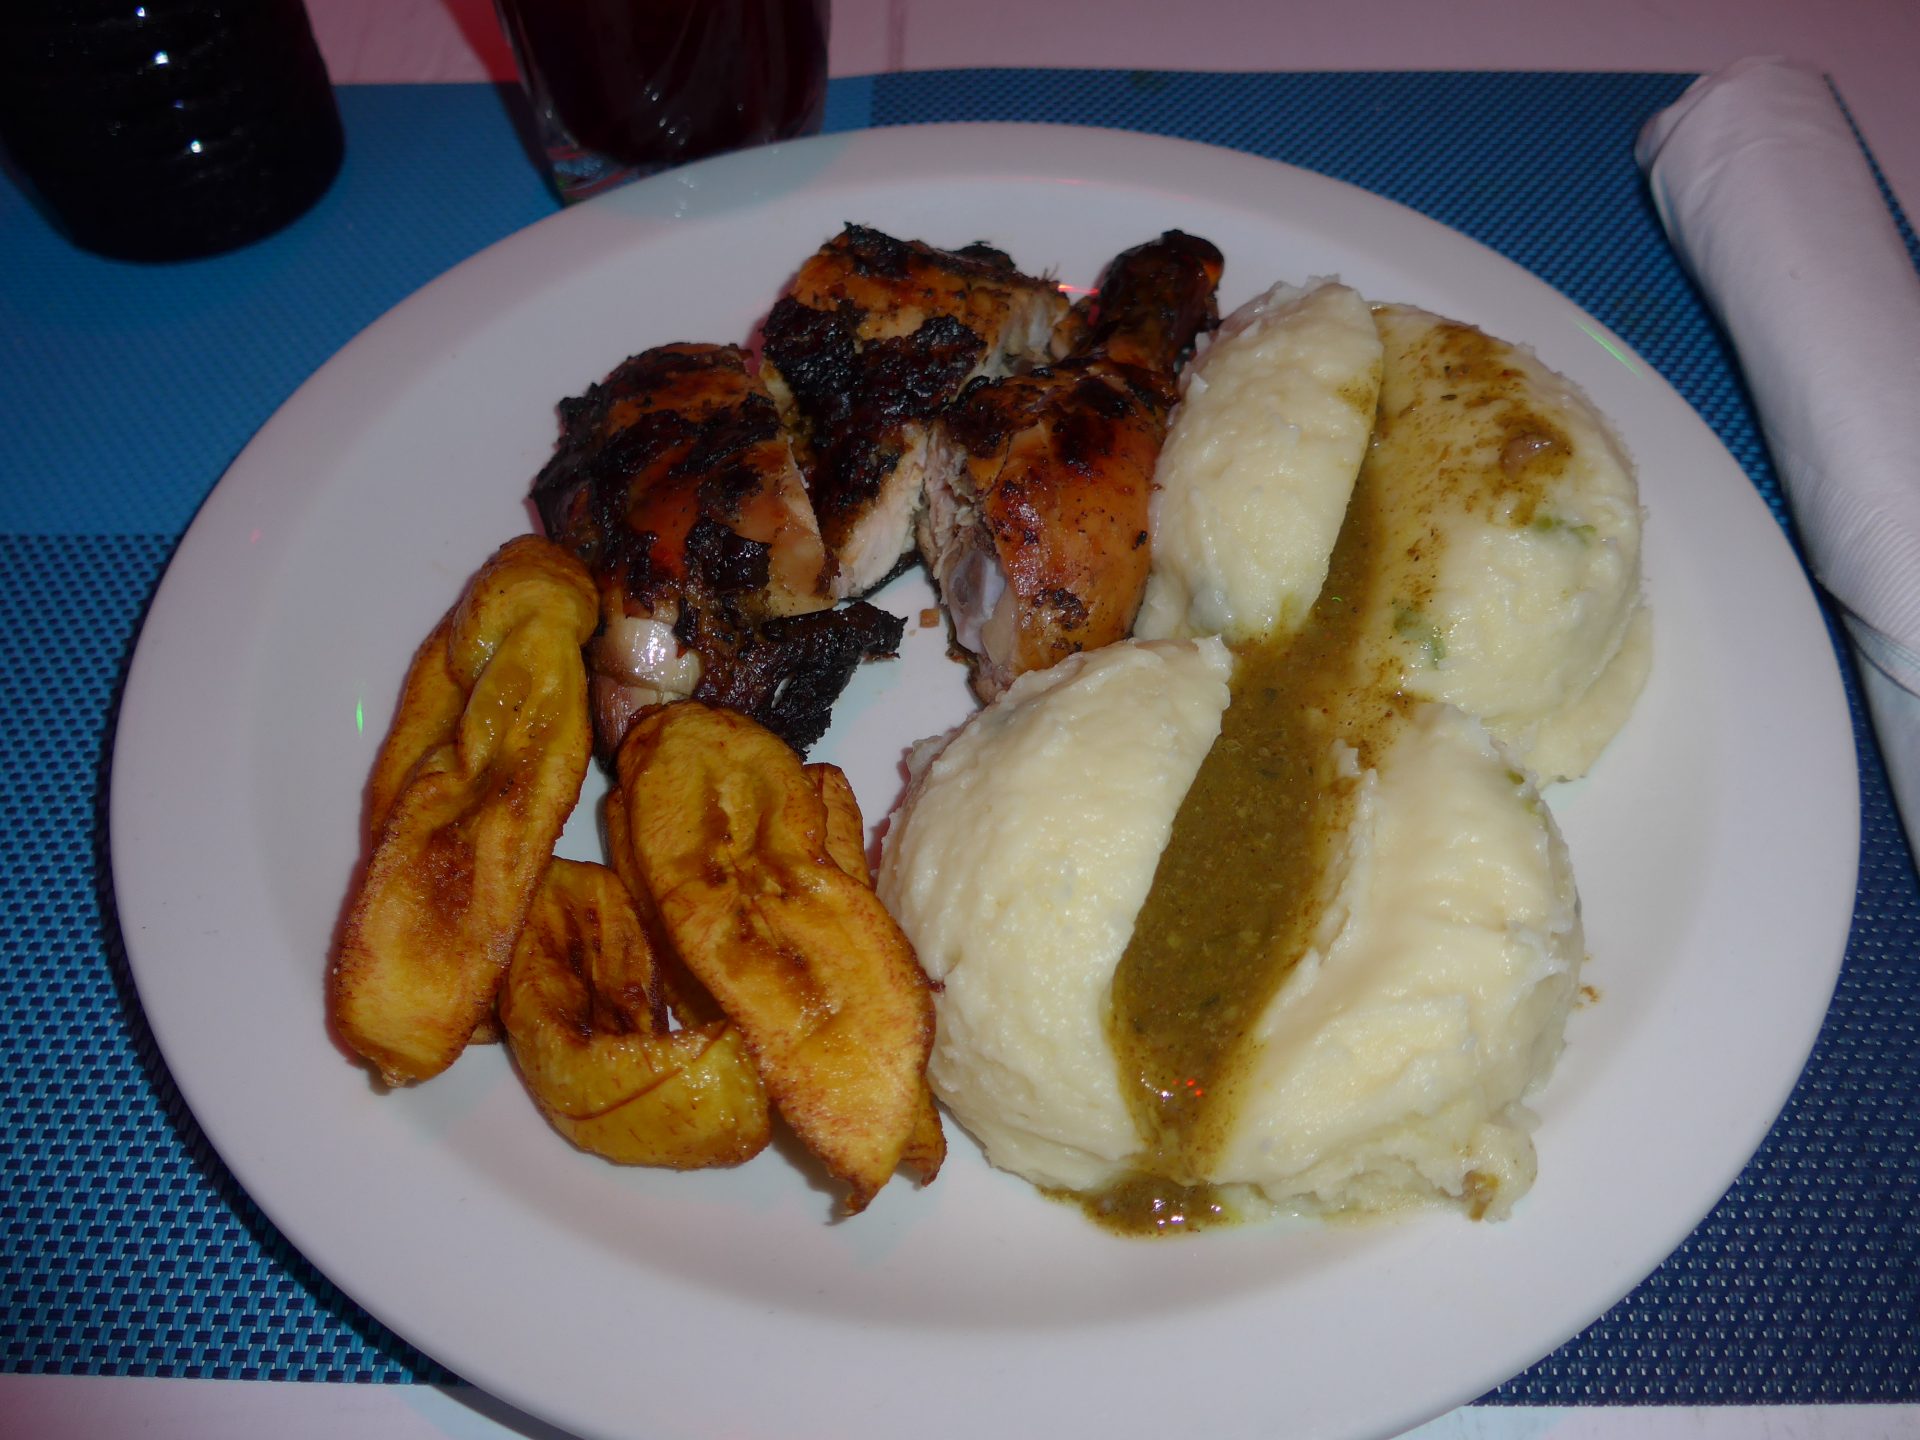 Where to find the best cheap food in Barbados